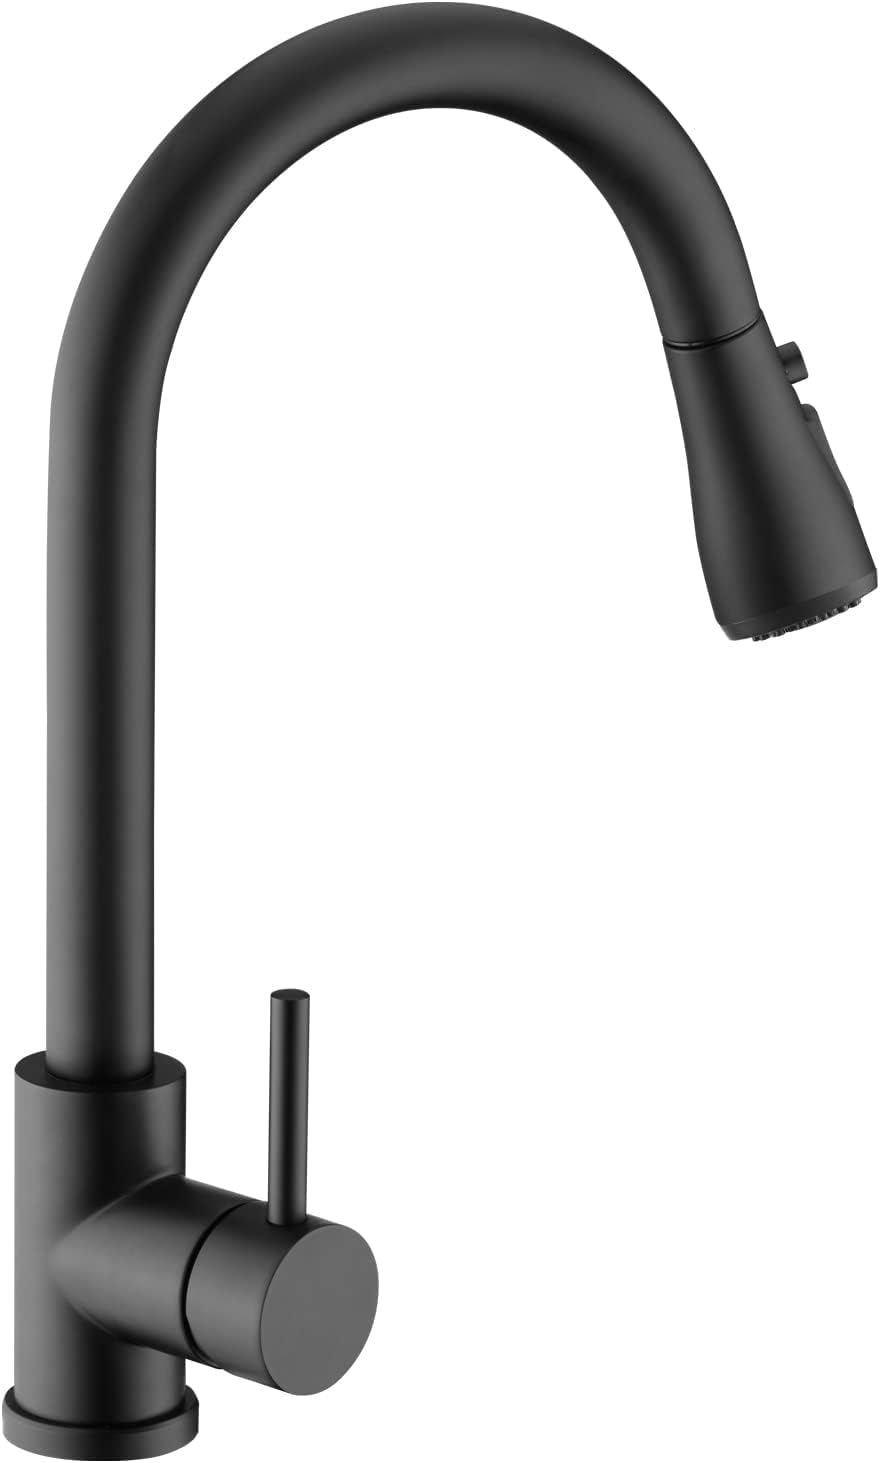 Black Kitchen Faucet with Pull Down Sprayer, VFAUOSIT Kitchen Sink Faucet, Commercial Stainless Steel Laundry Single Handle Pull Out Kitchen Faucets Matte Black, Grifo para Fregaderos de Cocina